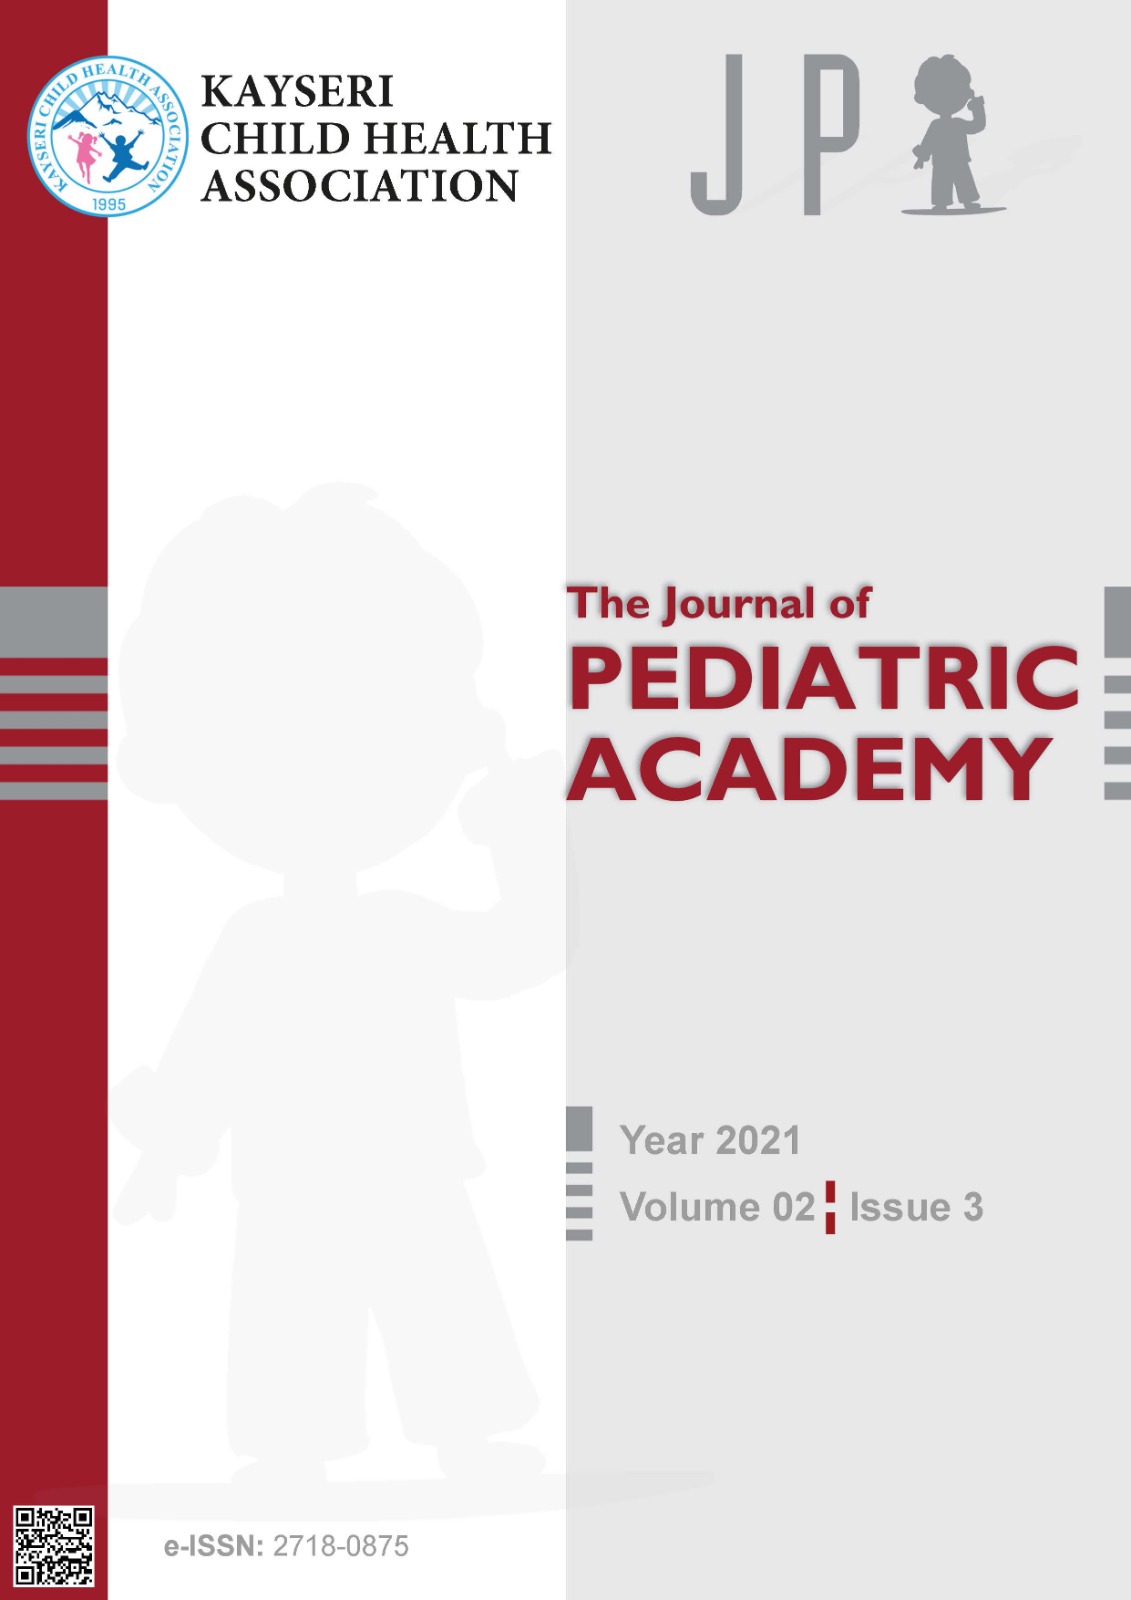 					View Vol. 2 No. 3 (2021): The Journal of Pediatric Academy
				